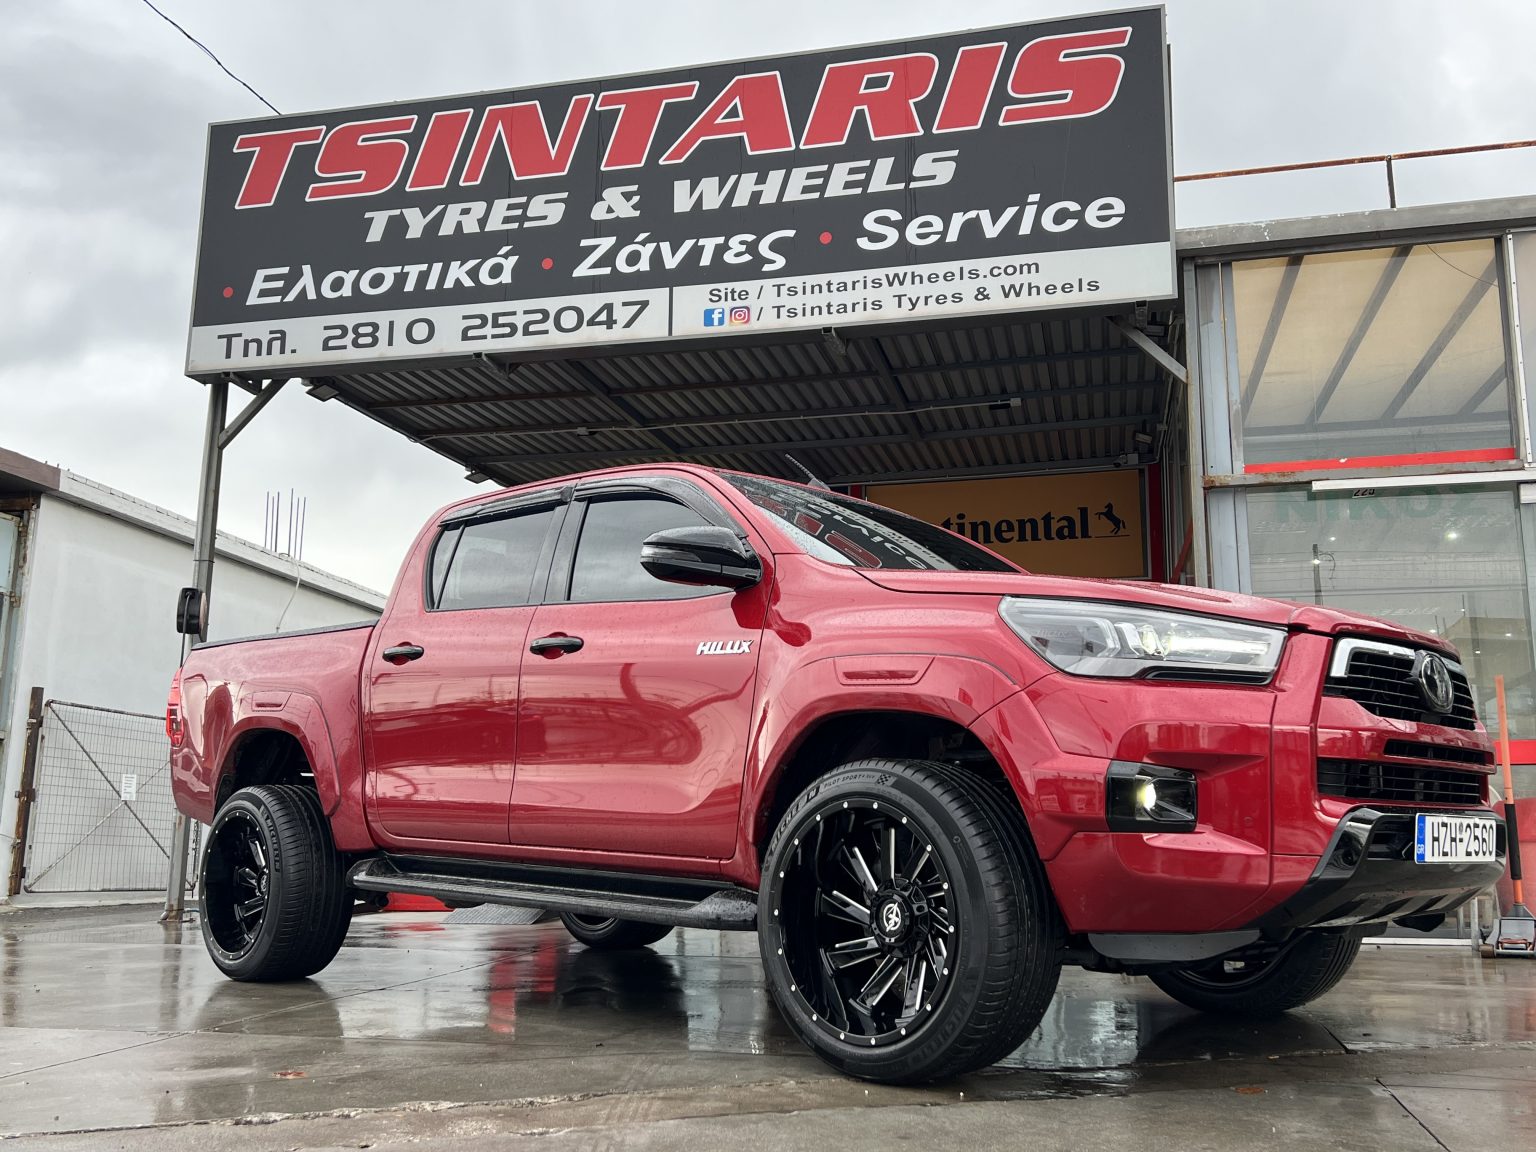 Welcome December❄️
Toyota Hilux on 20x12 rims & 295/40R20 110Y
Michelin Pilot Sport 4 SUV